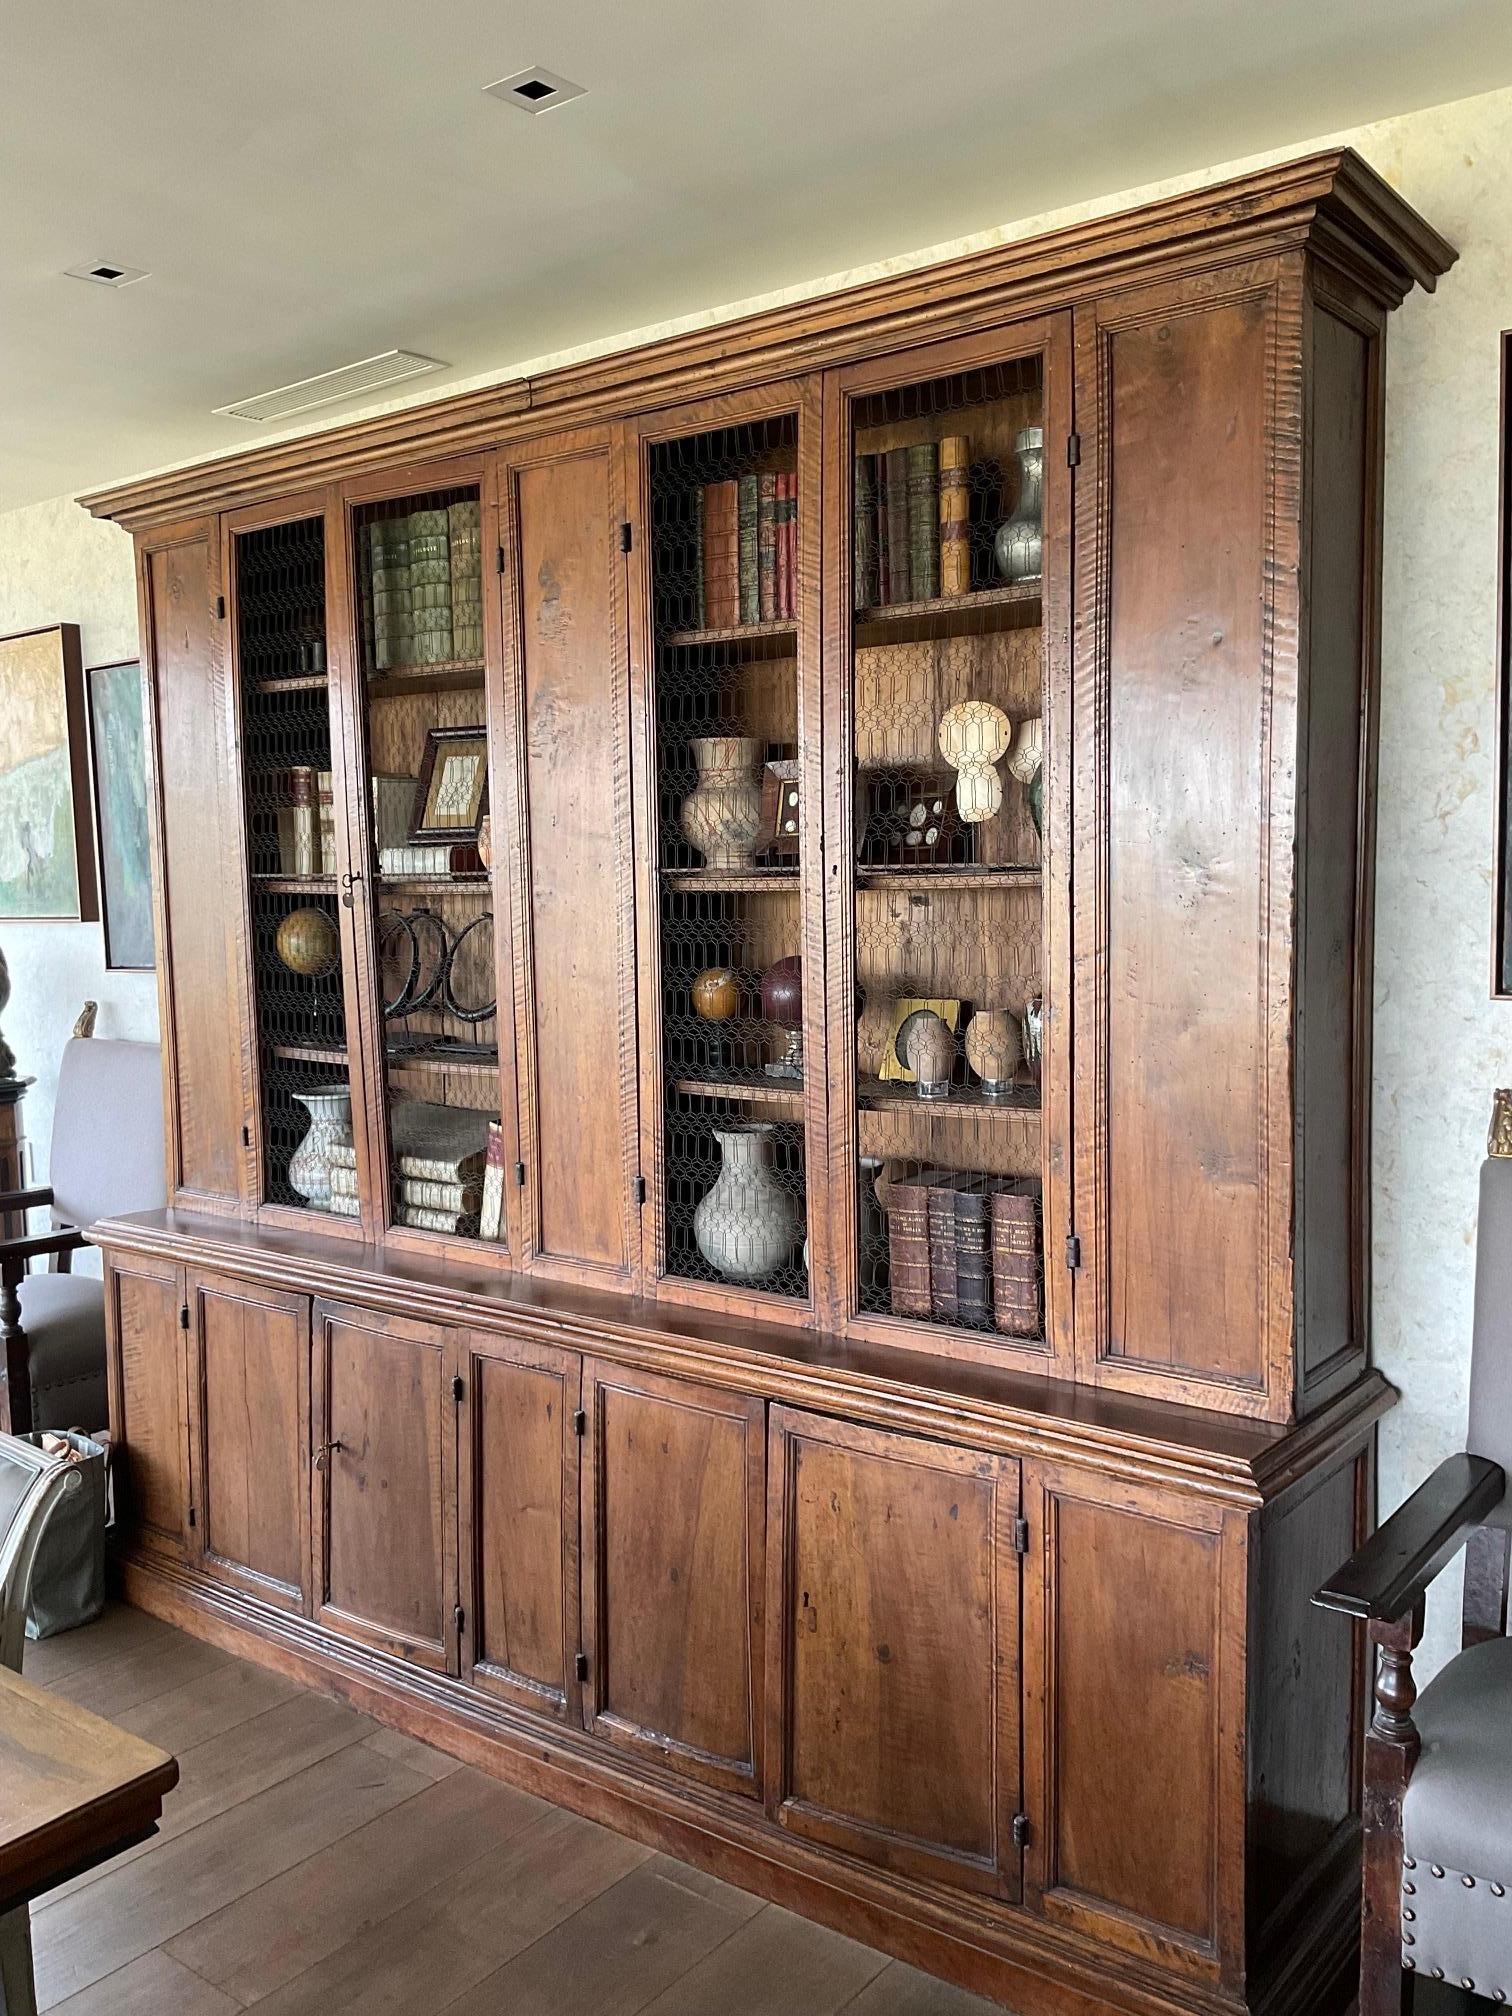 18th-century Tuscan walnut bookcase with original wire mesh cabinet doors. The base features concealed doors for increased storage. Handsome and capacious, this special piece has great dimensions and a rich, warm patina. 

Italy, circa